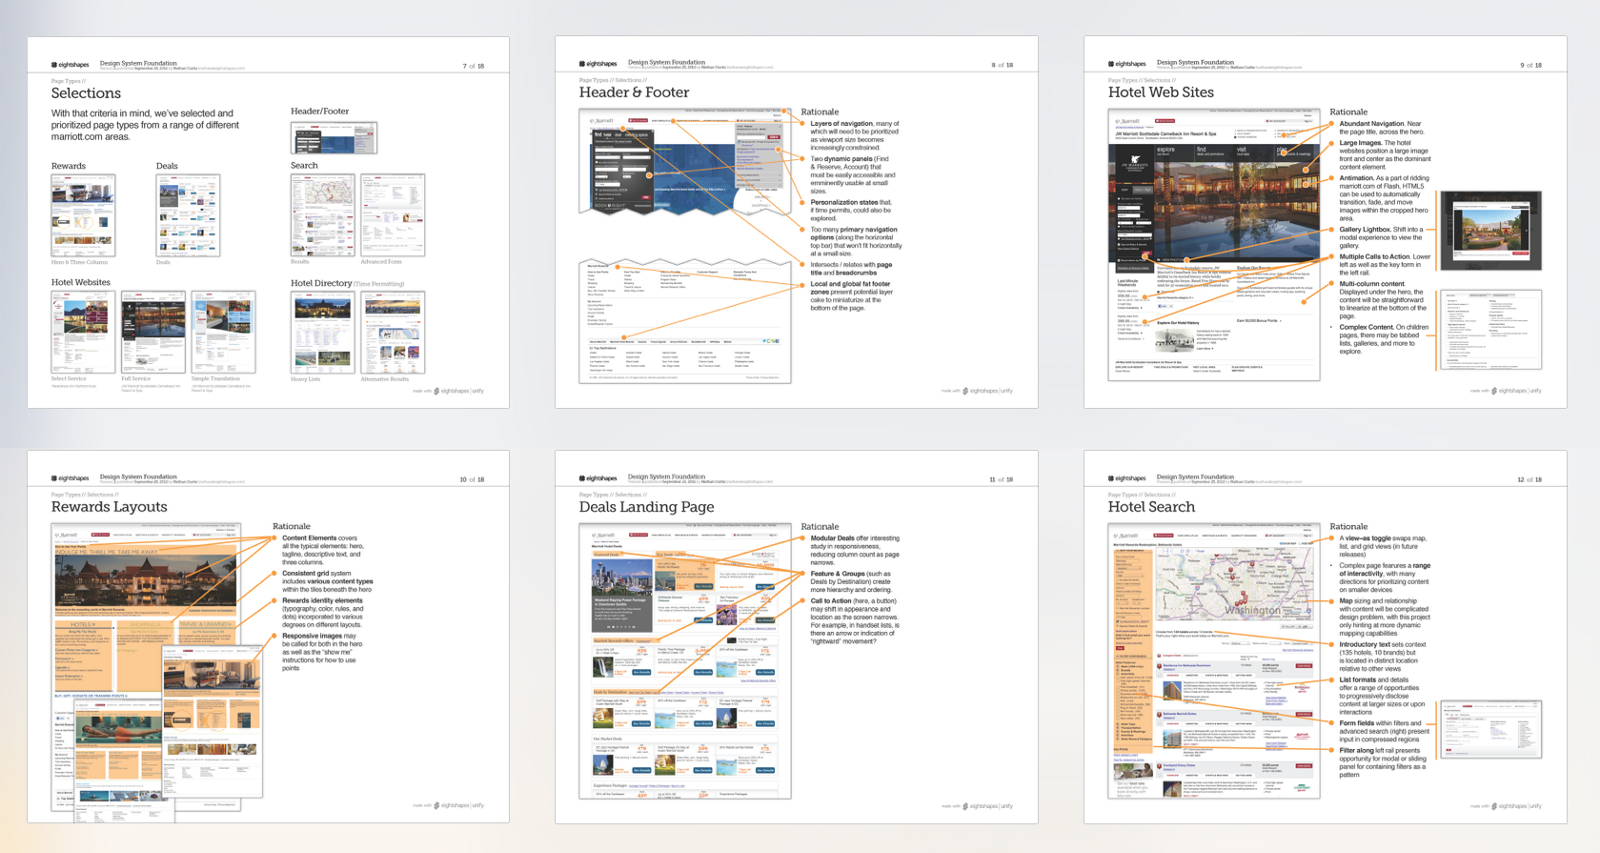 Marriott.com planning doc, describing the rationale to design each page, back when we made such docs. 2012